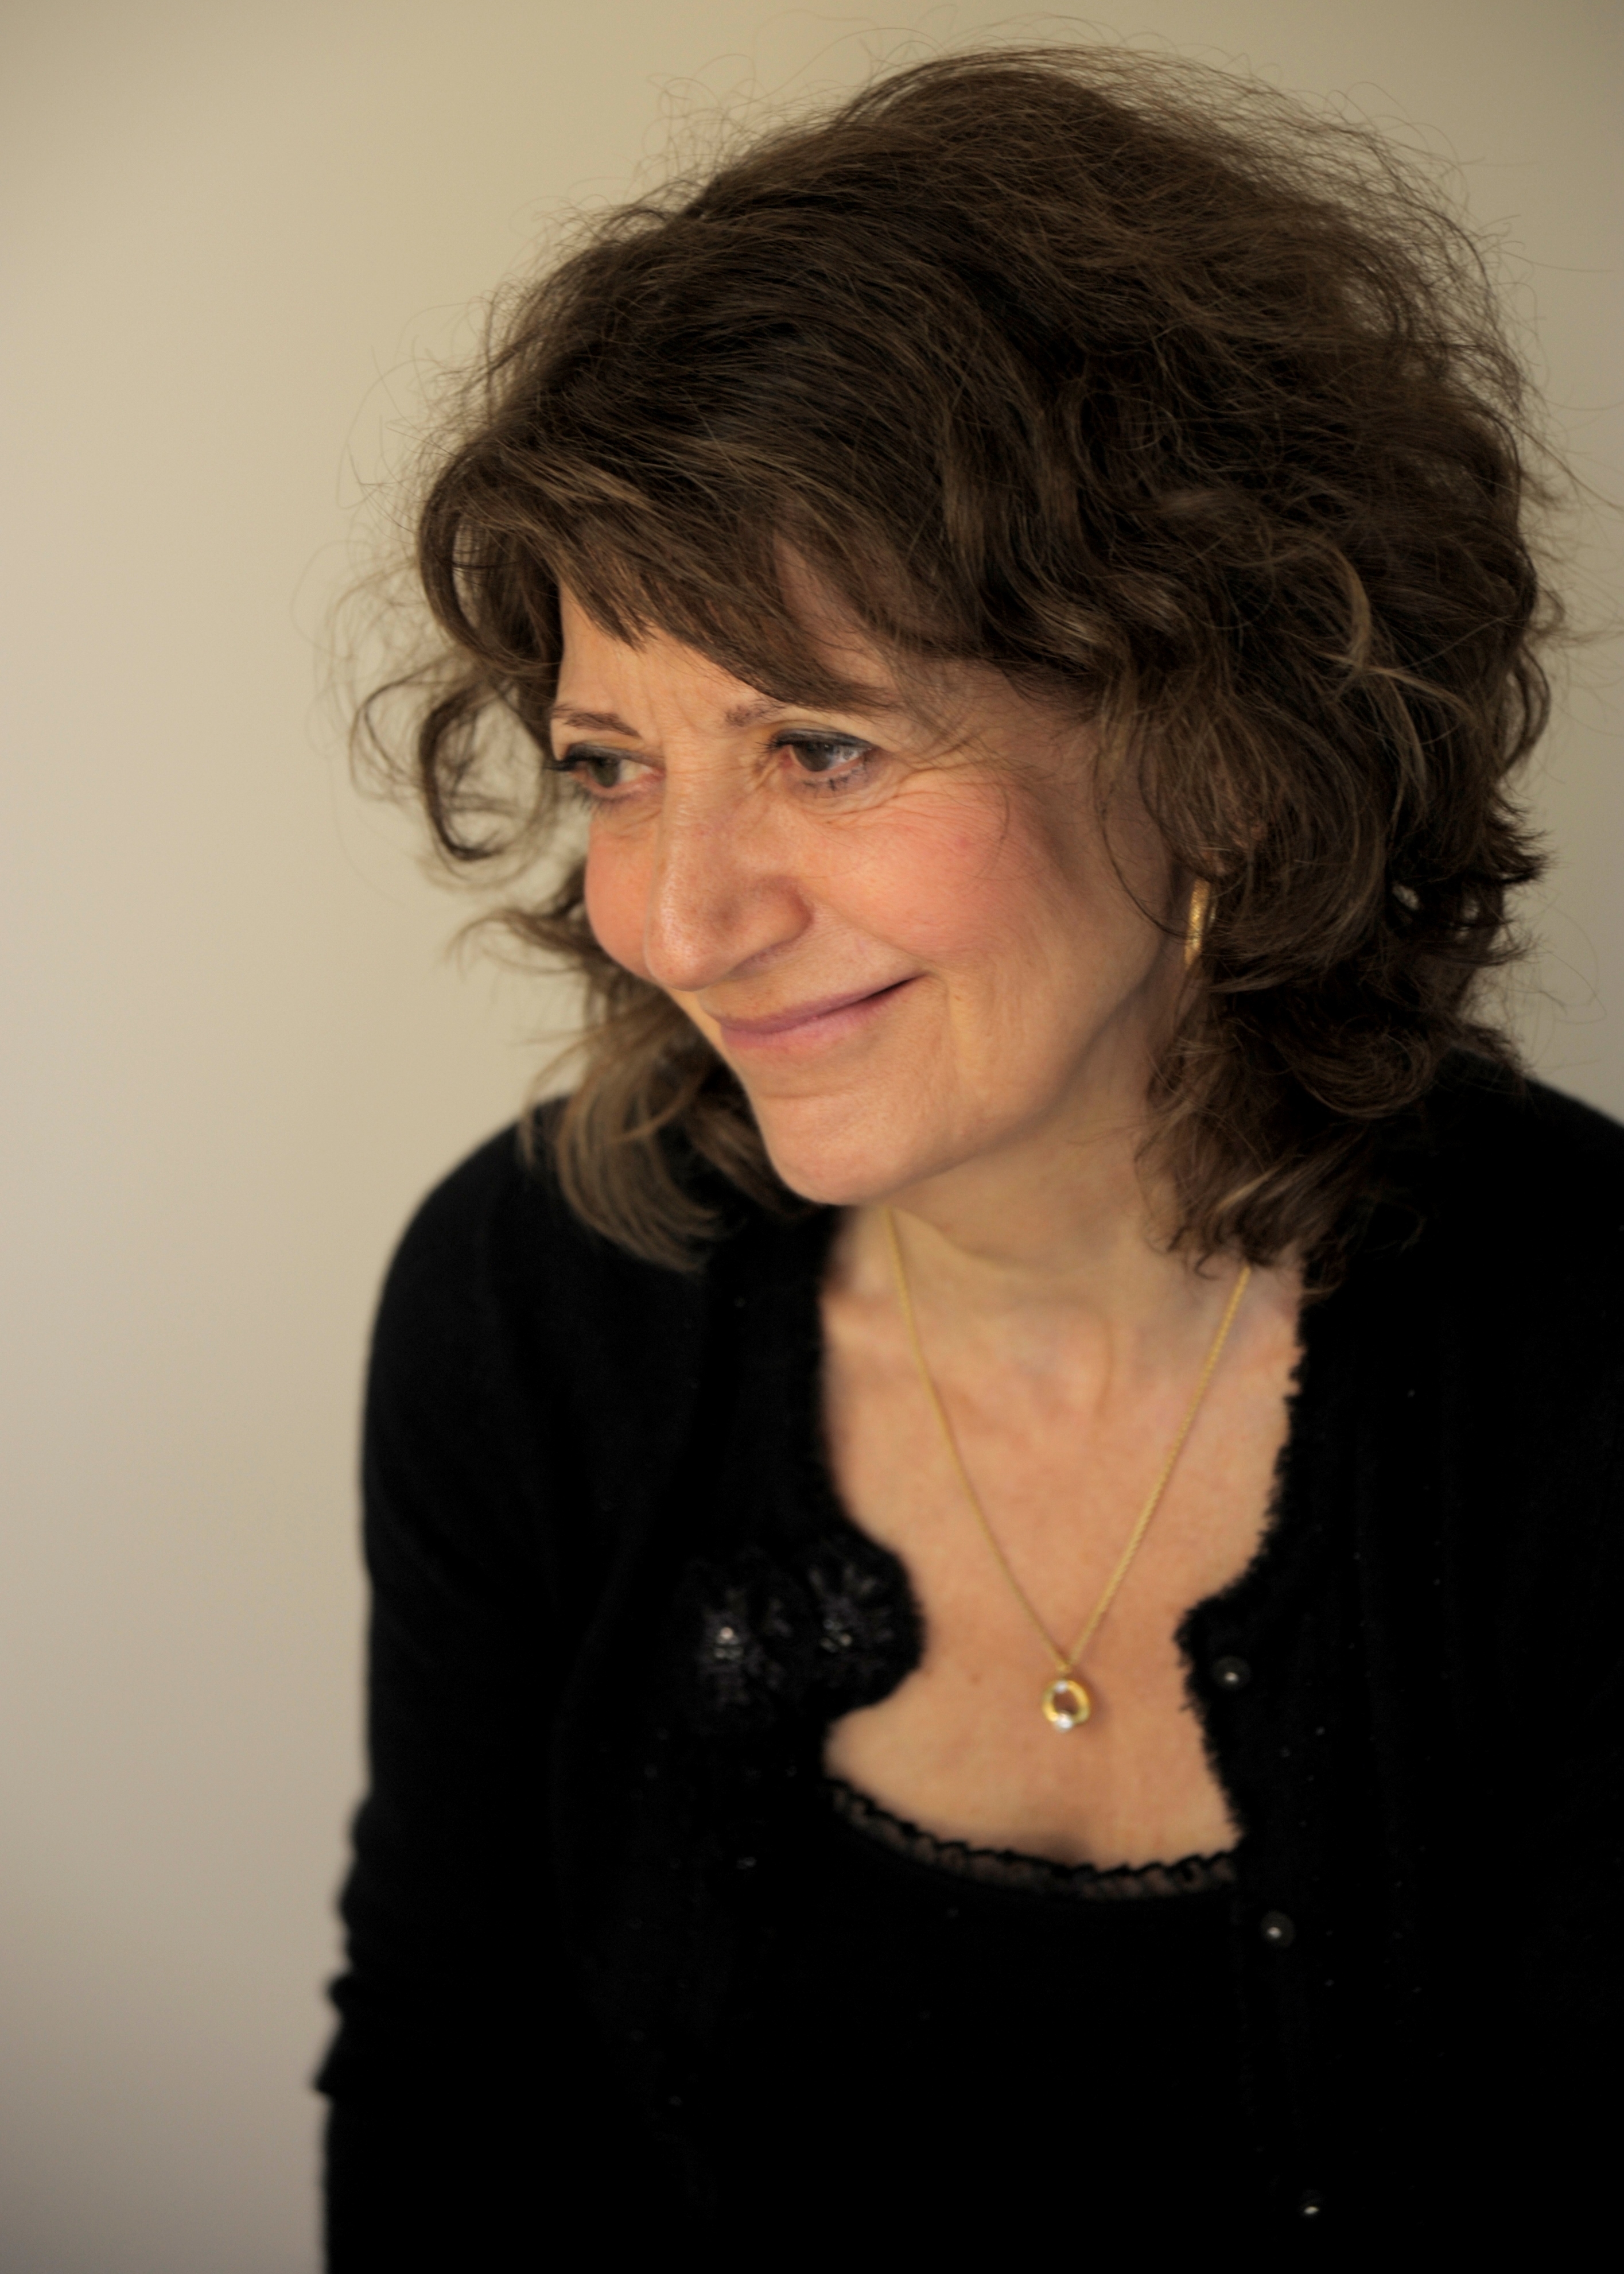 Susie Orbach's In Therapy: The Unfolding Story